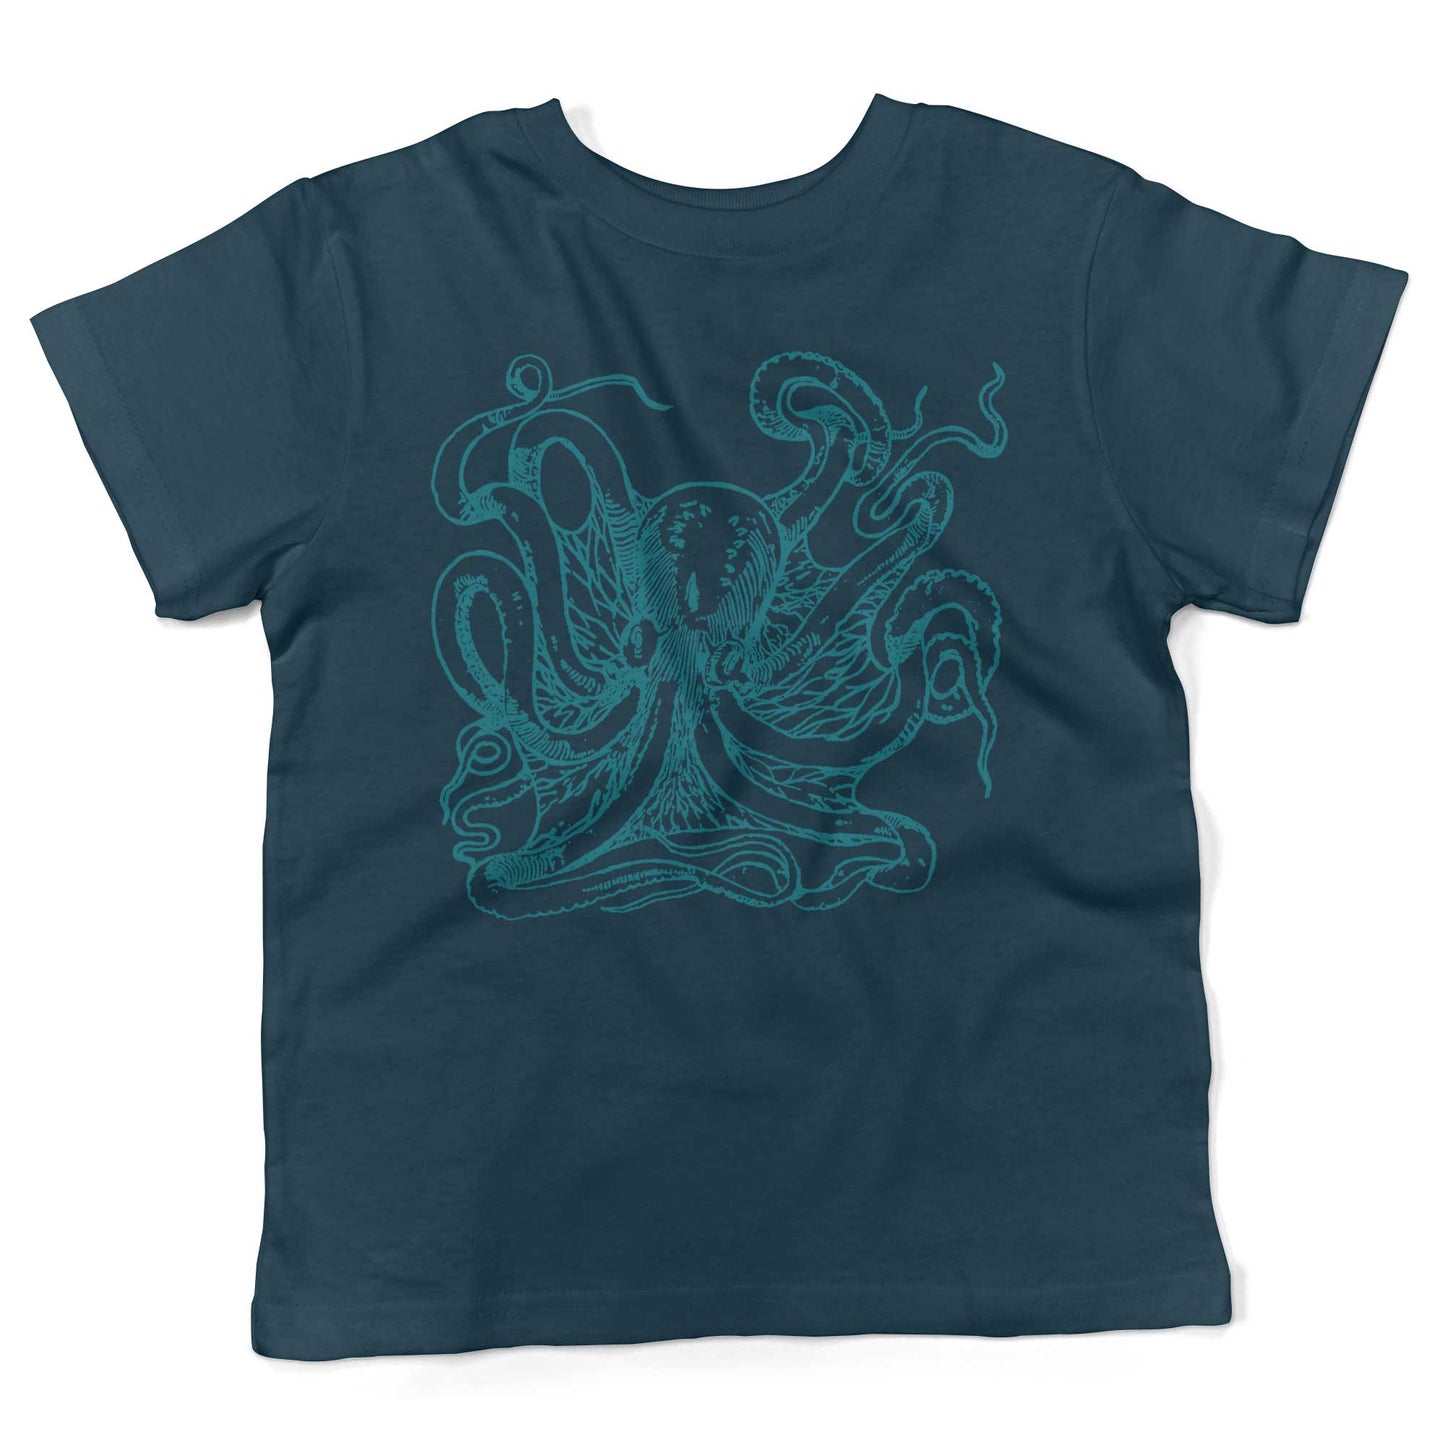 Giant Octopus Toddler Shirt-Organic Pacific Blue-2T